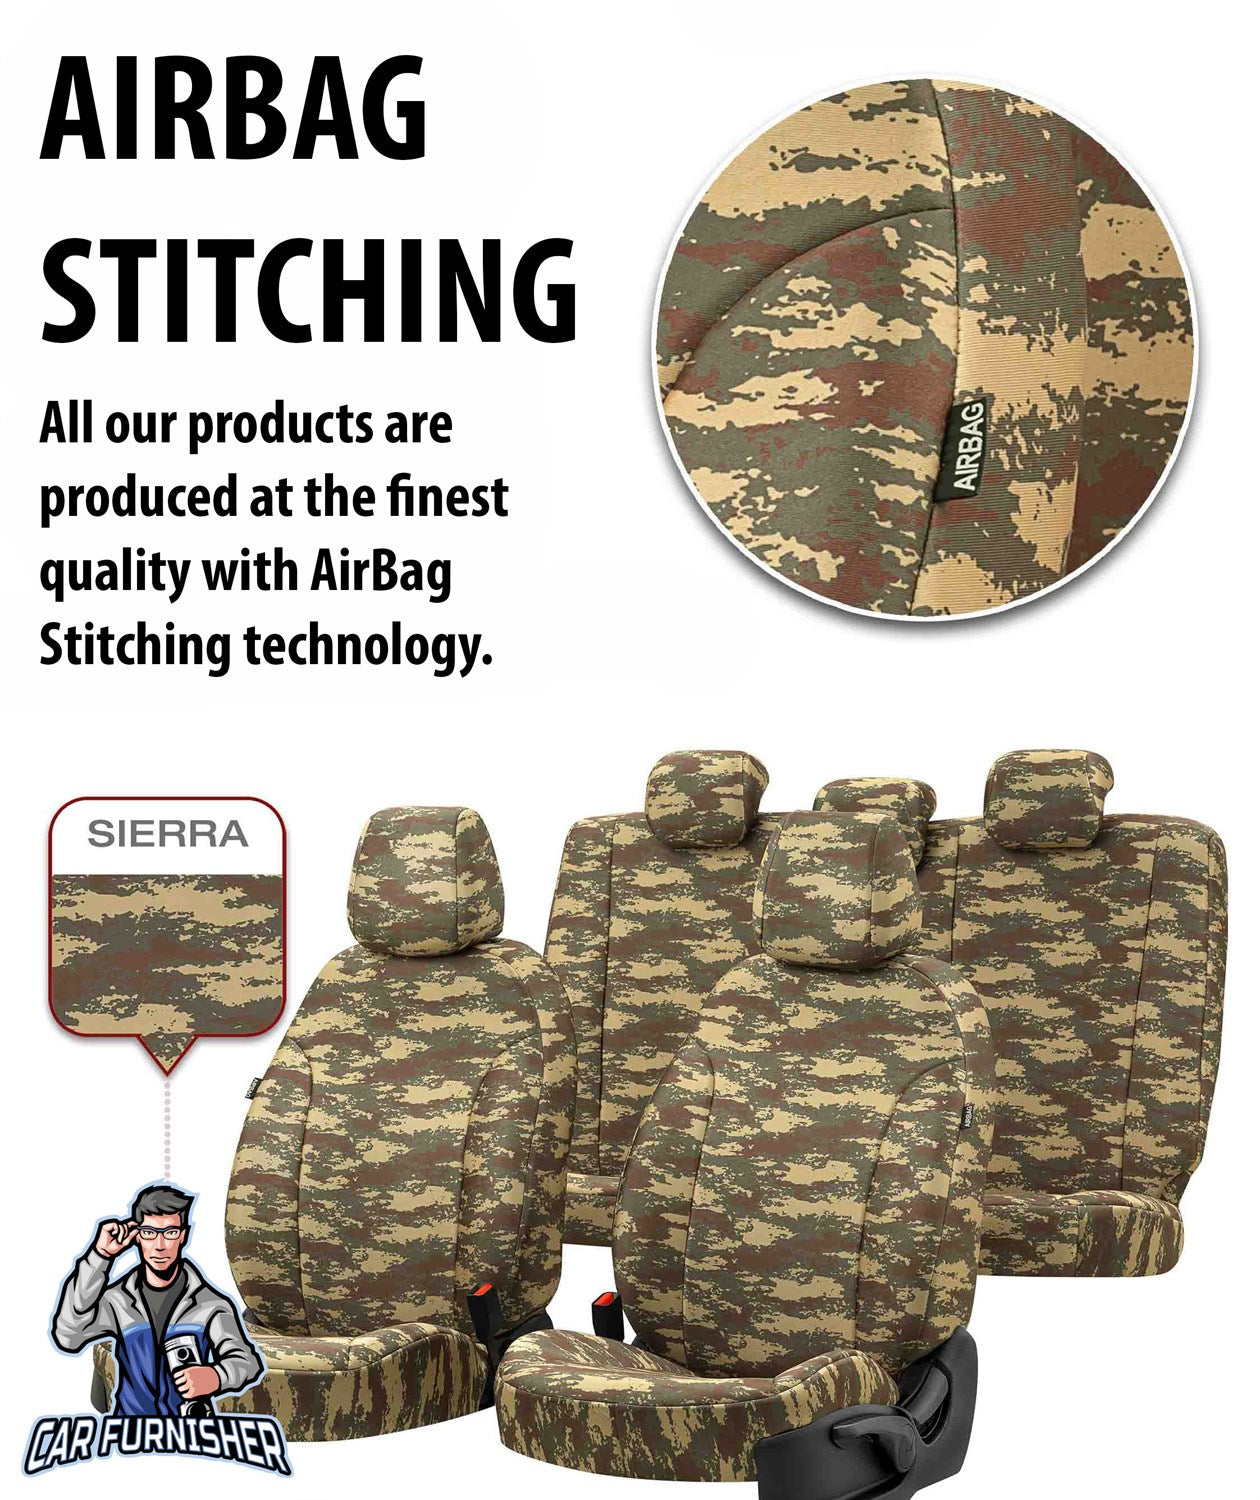 Jeep Grand Cherokee Seat Cover Camouflage Waterproof Design Montblanc Camo Waterproof Fabric